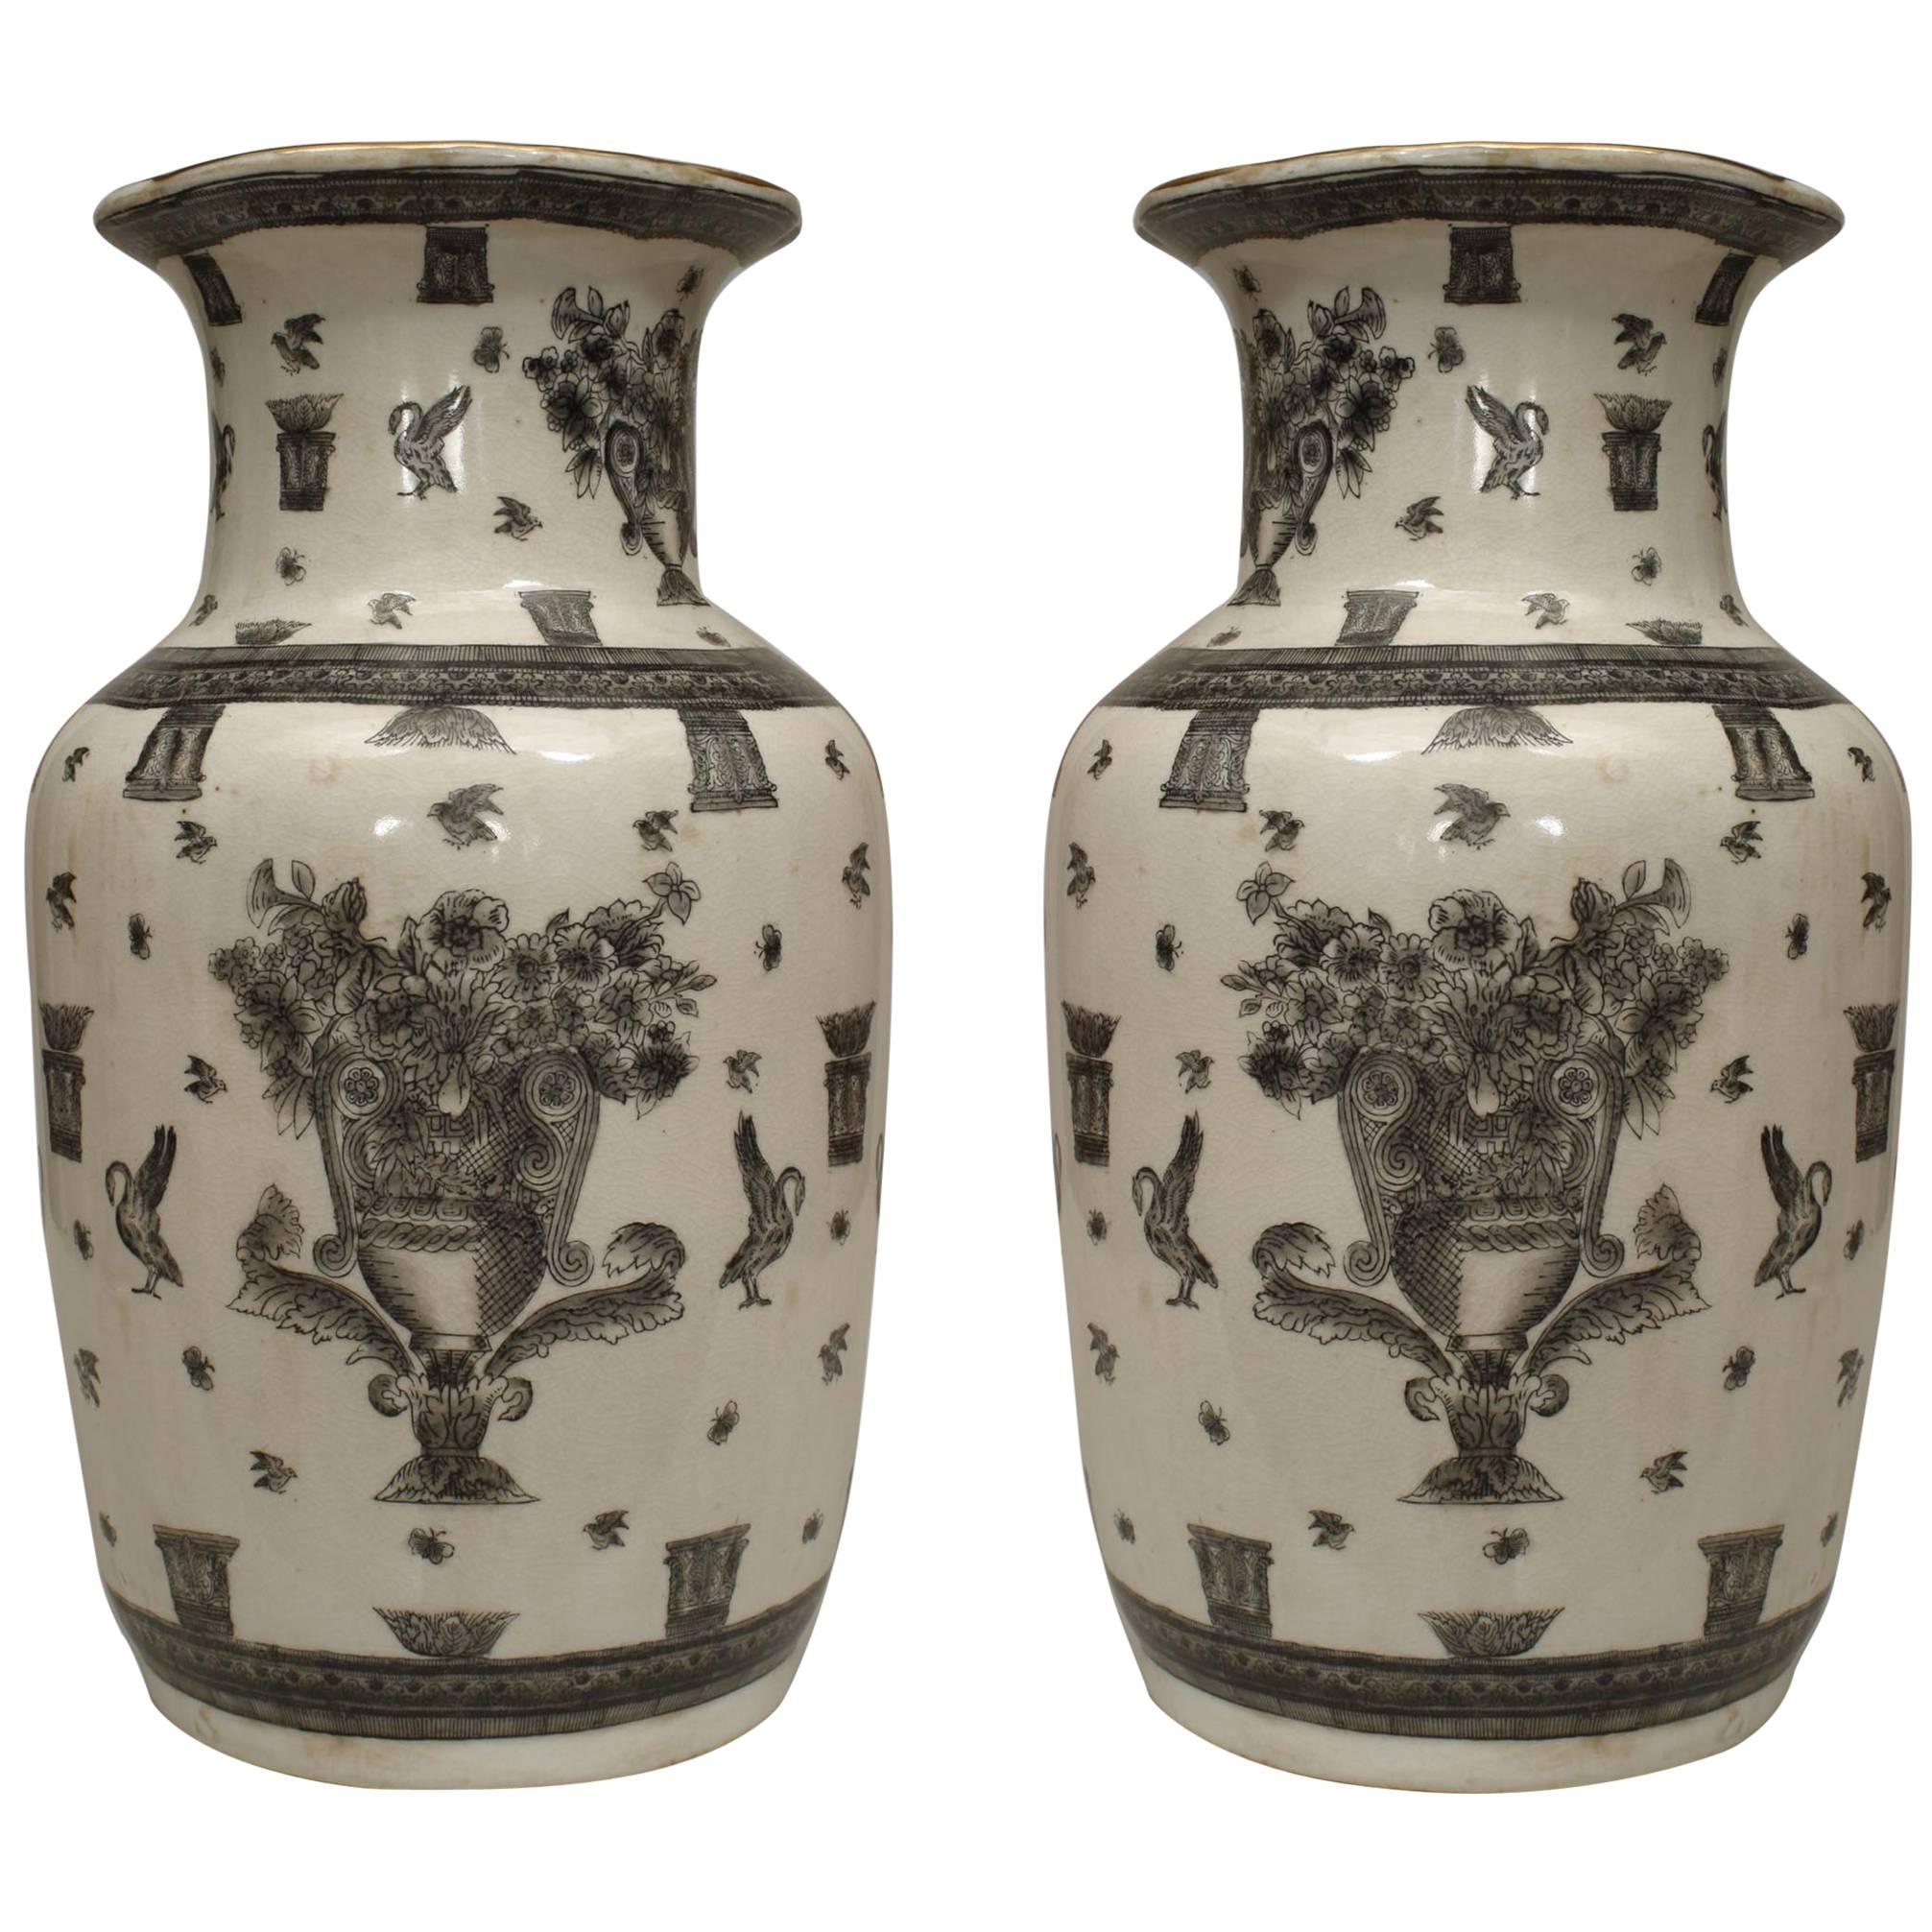 Pair of Chinese White and Black Porcelain Urns